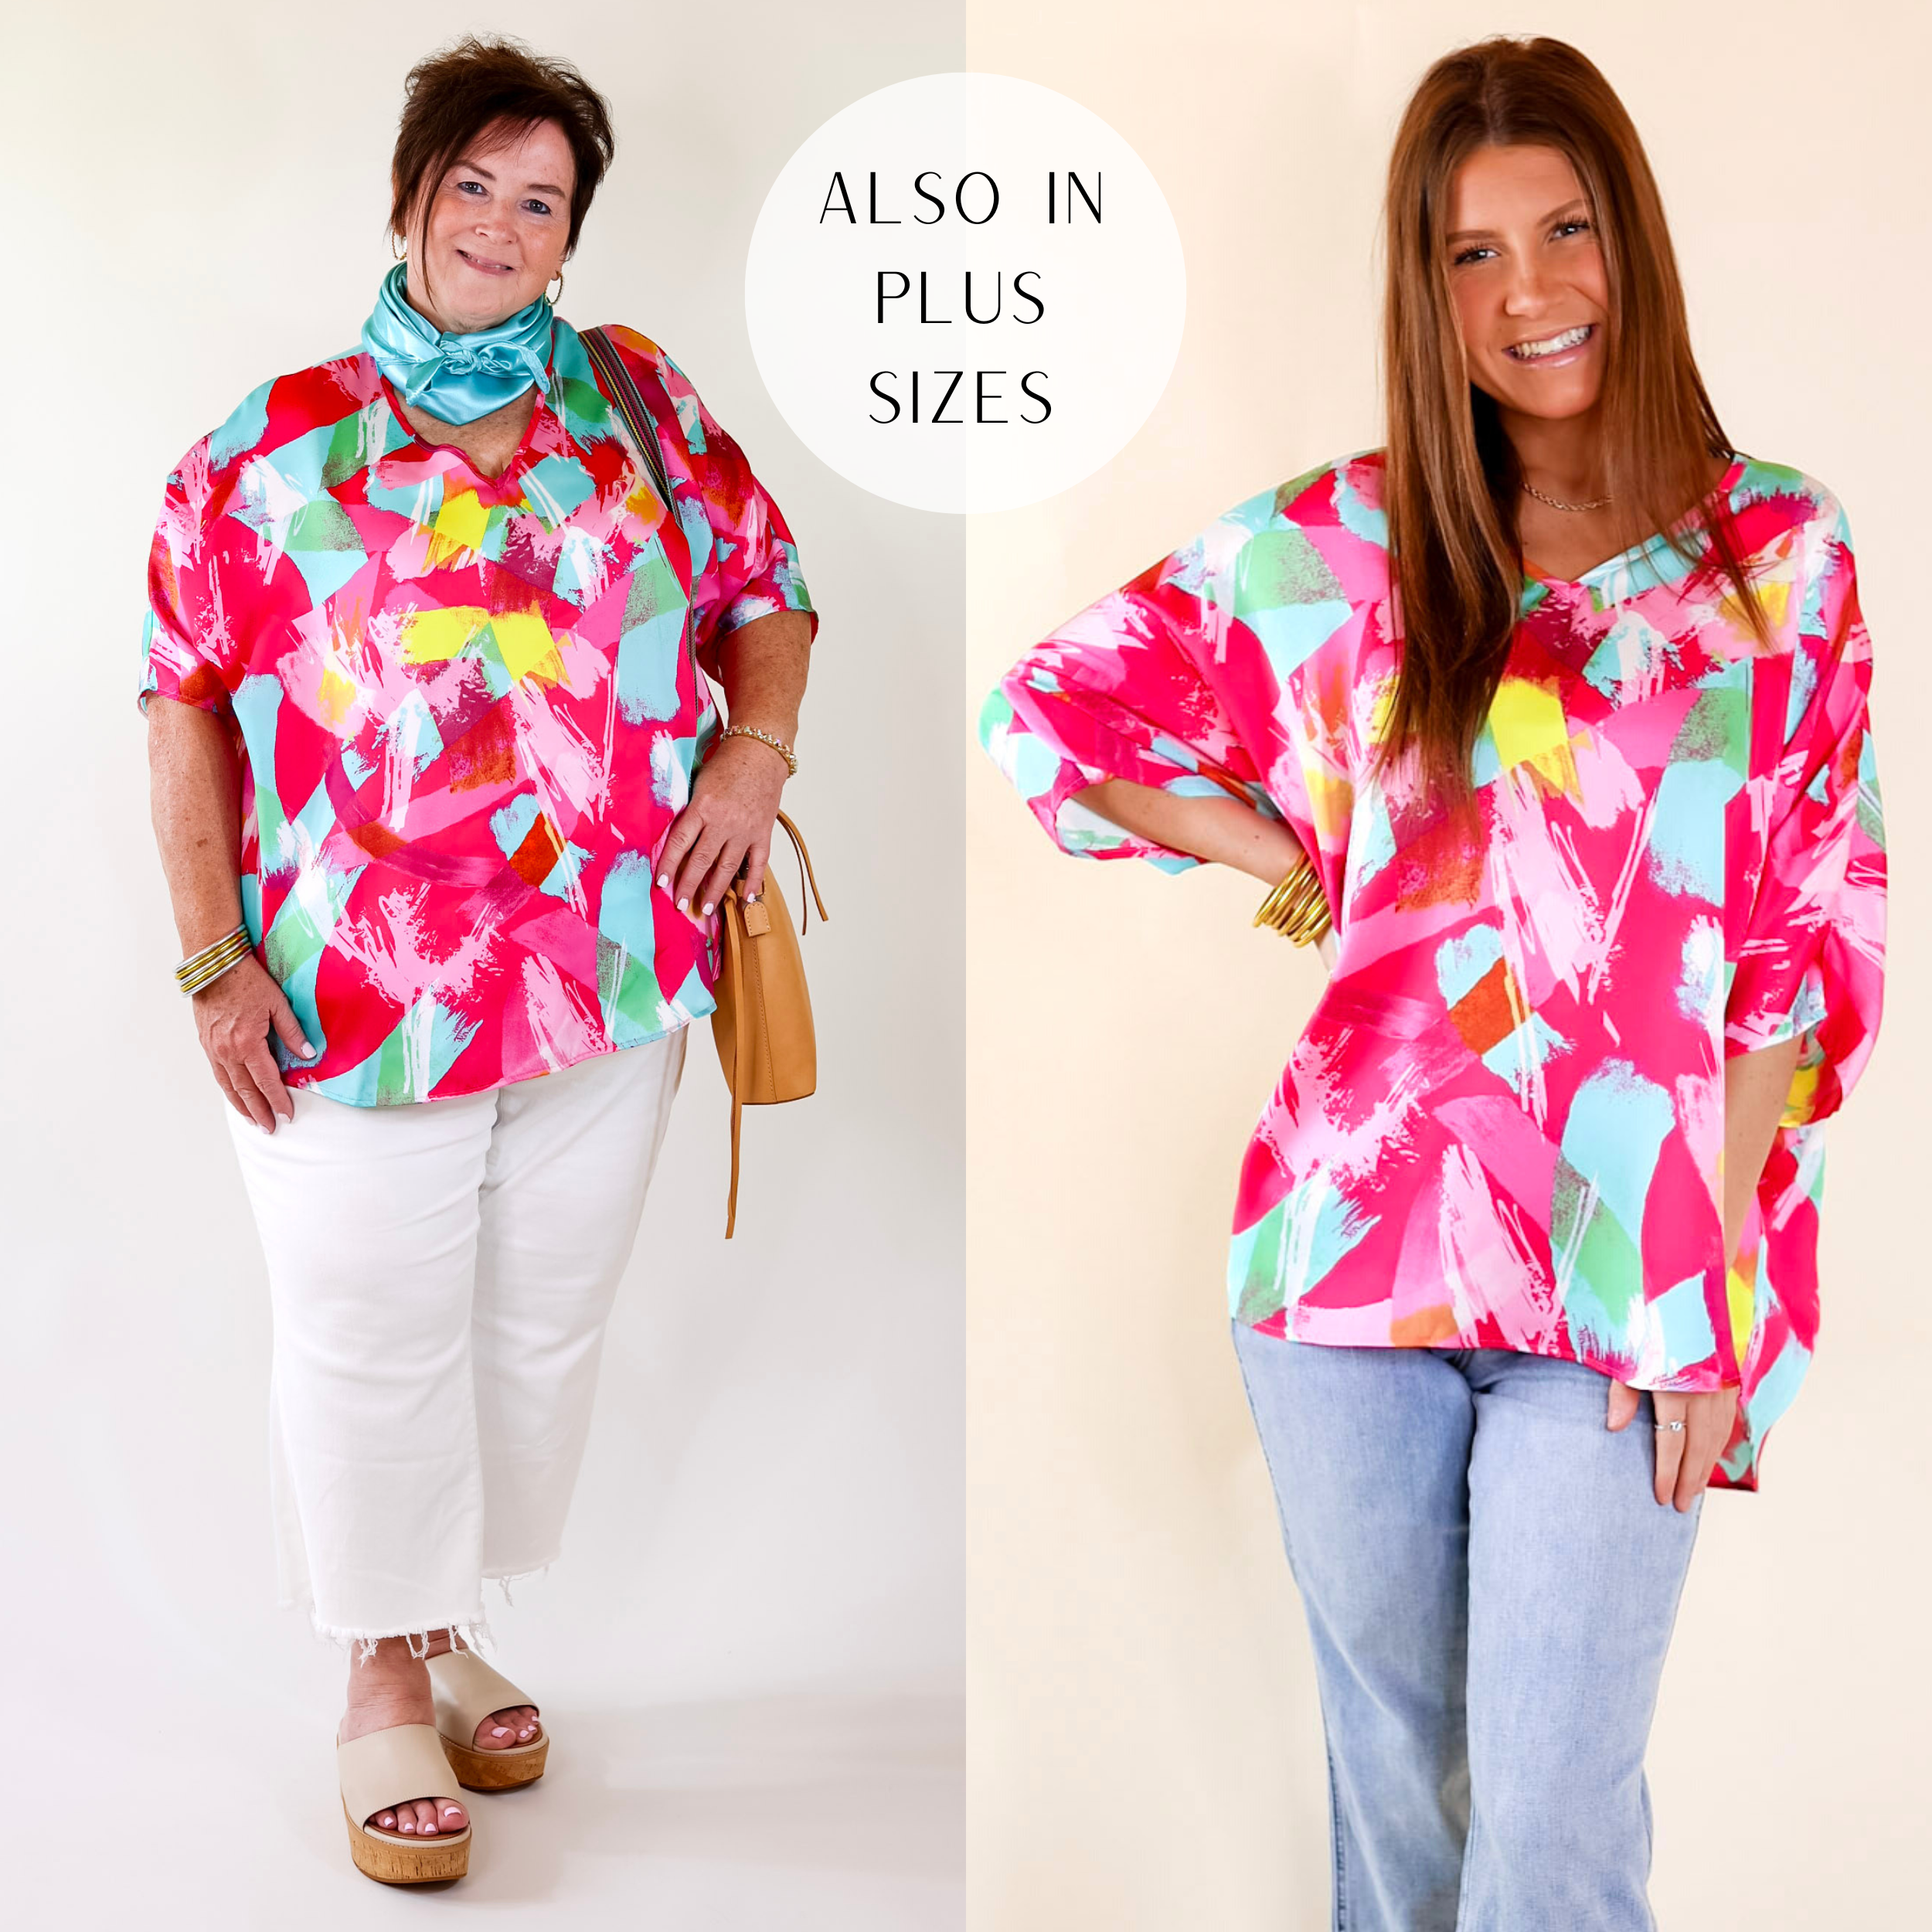 A pink poncho with blue, yellow, light pink, and dark pink brush strokes. Also features flowy 3/4 length sleeves, V neck collar, and an oversized fit. Item is pictured on a pale pink background.